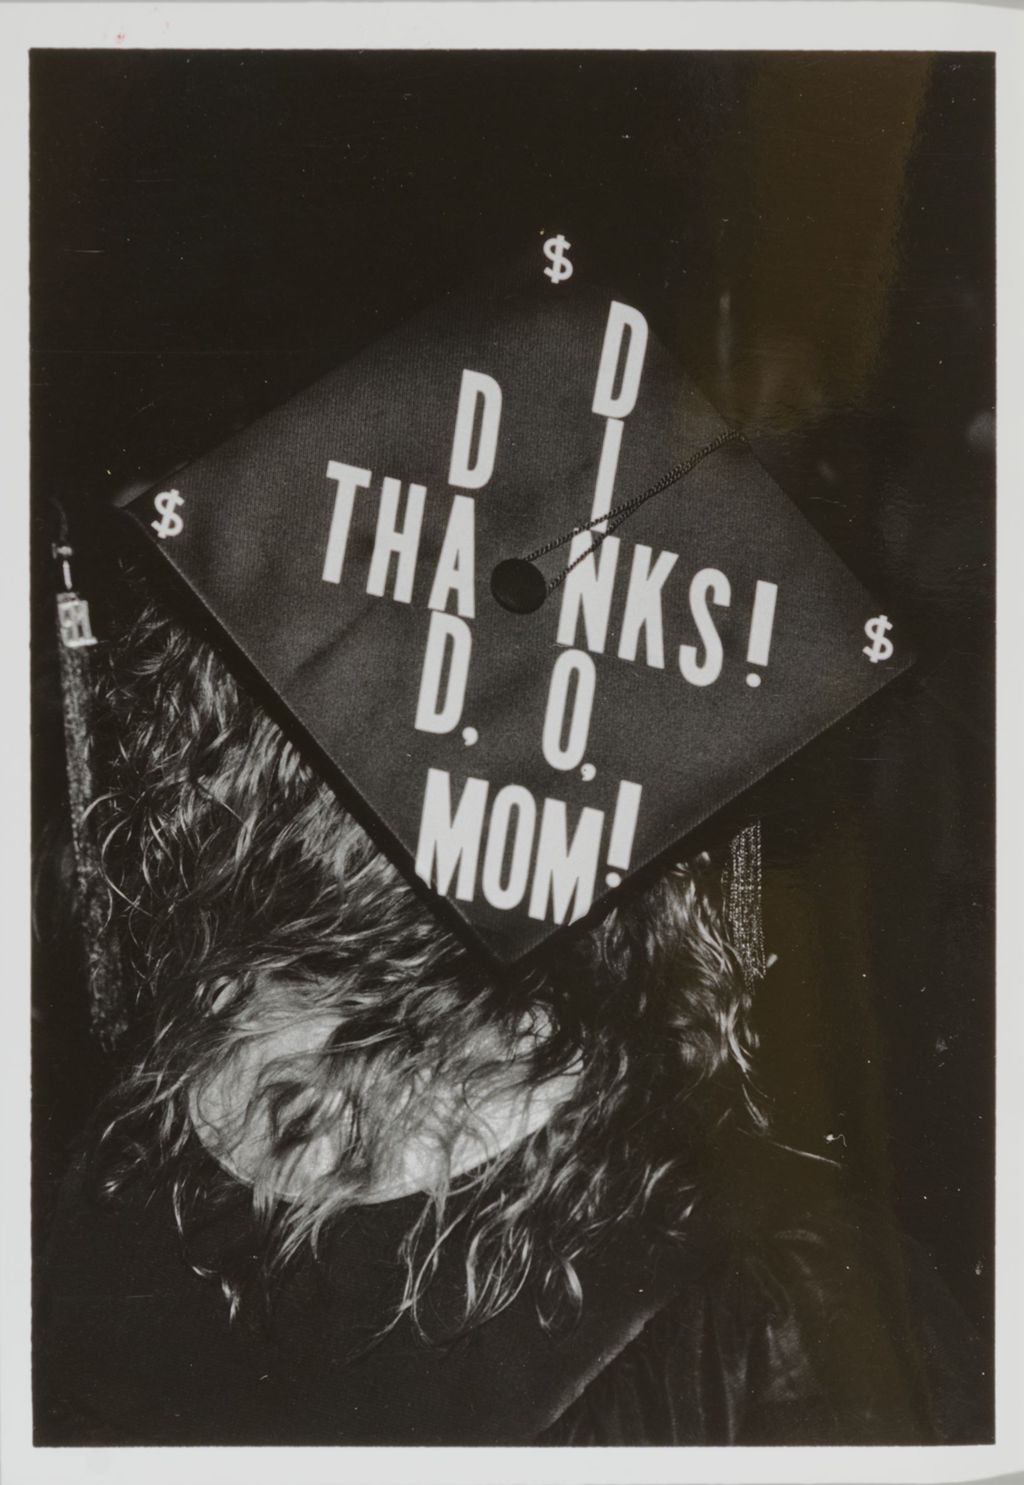 Miniature of Decorated mortarboard at the graduation ceremony